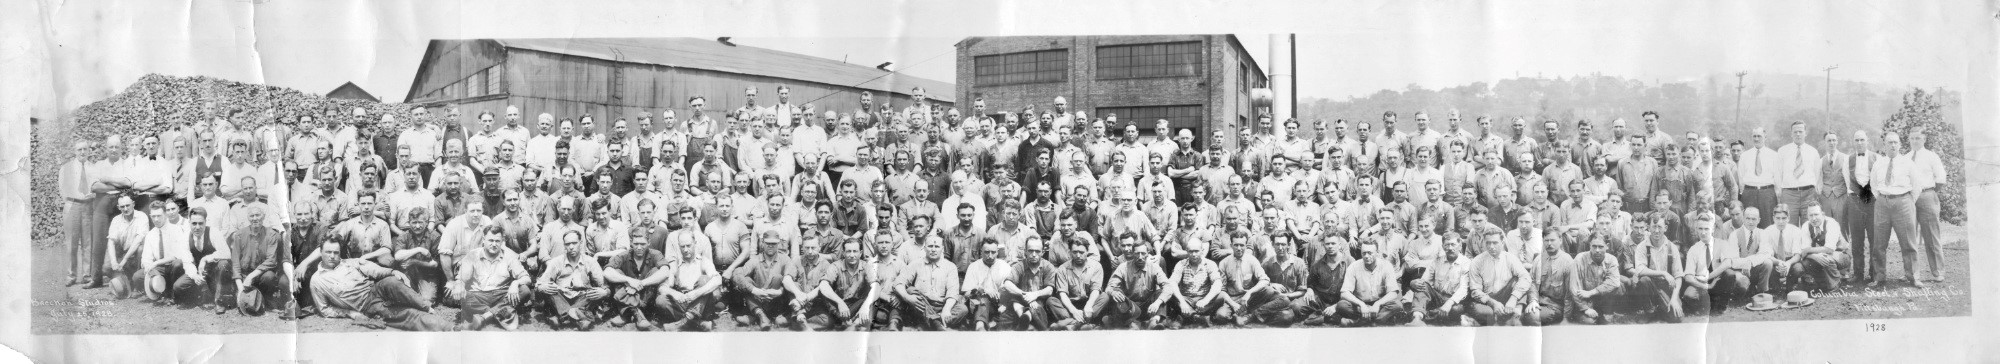 Employees of Columbia Steel and Shafting Company, July 1928